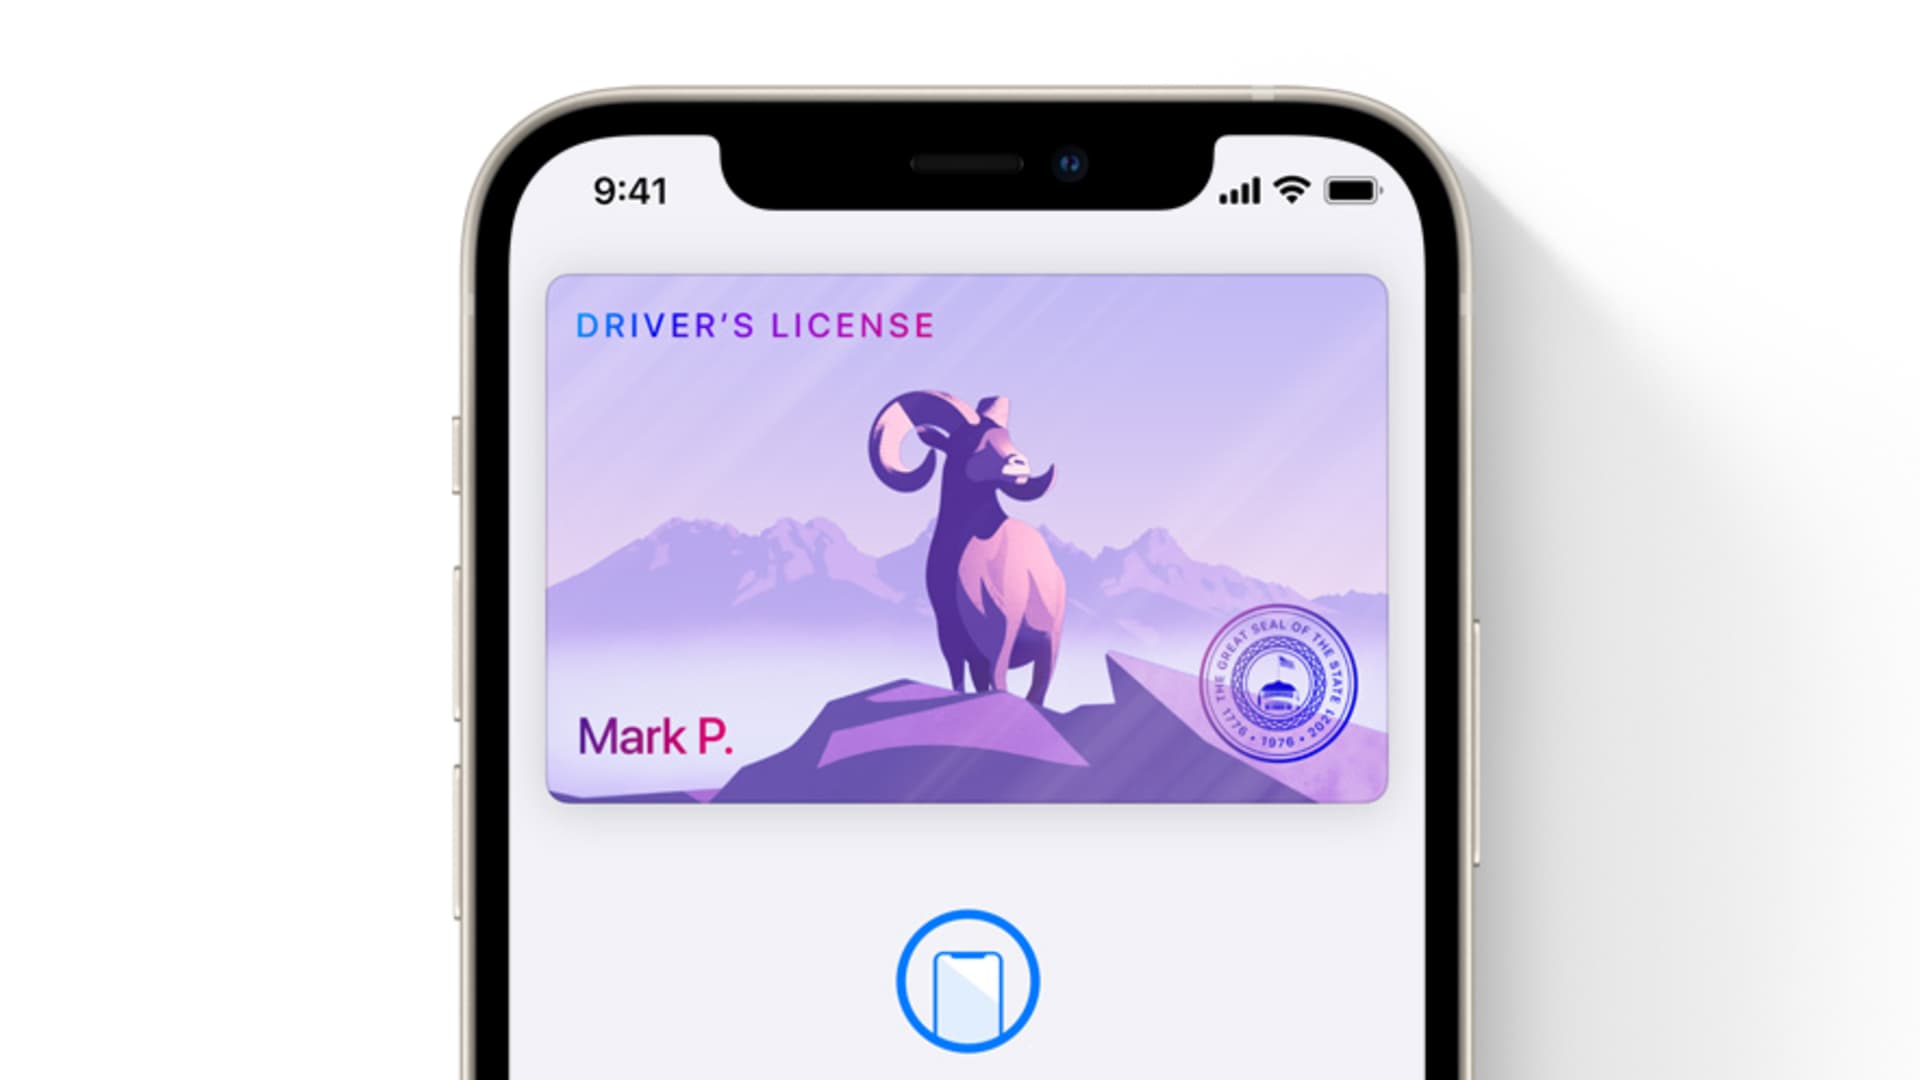 Apple iOS 15 will support storing a driver's license in Apple Wallet.